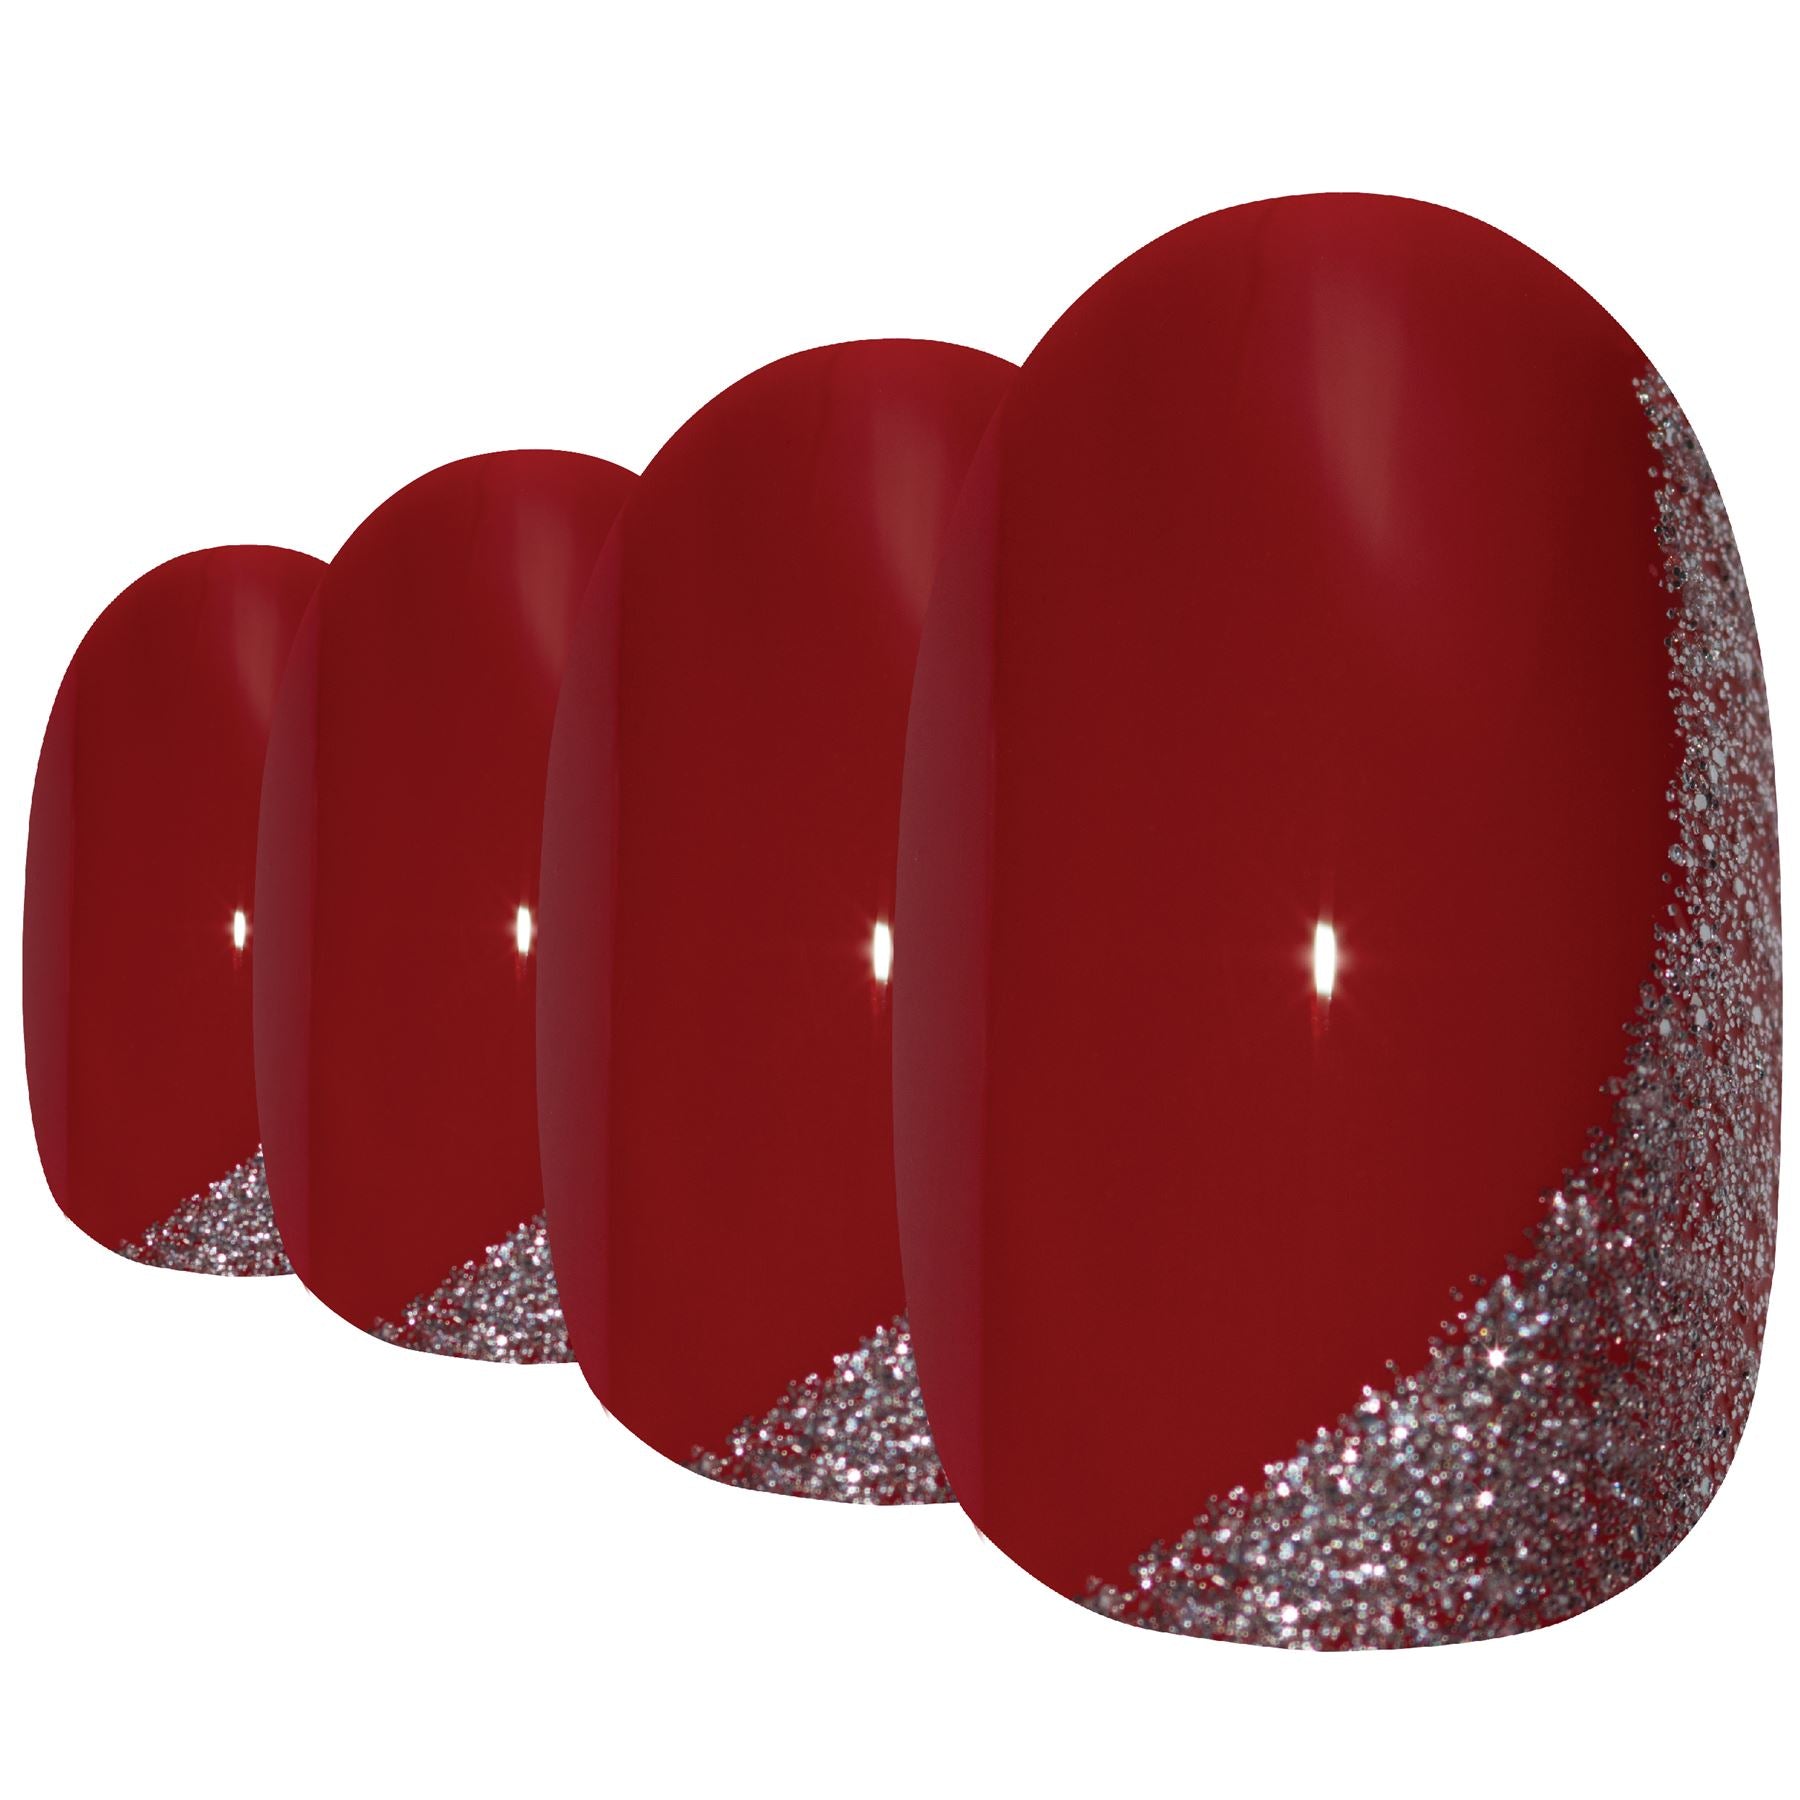 False Nails by Bling Art Red Glitter Oval Medium Fake Acrylic Nail Tips with Glue